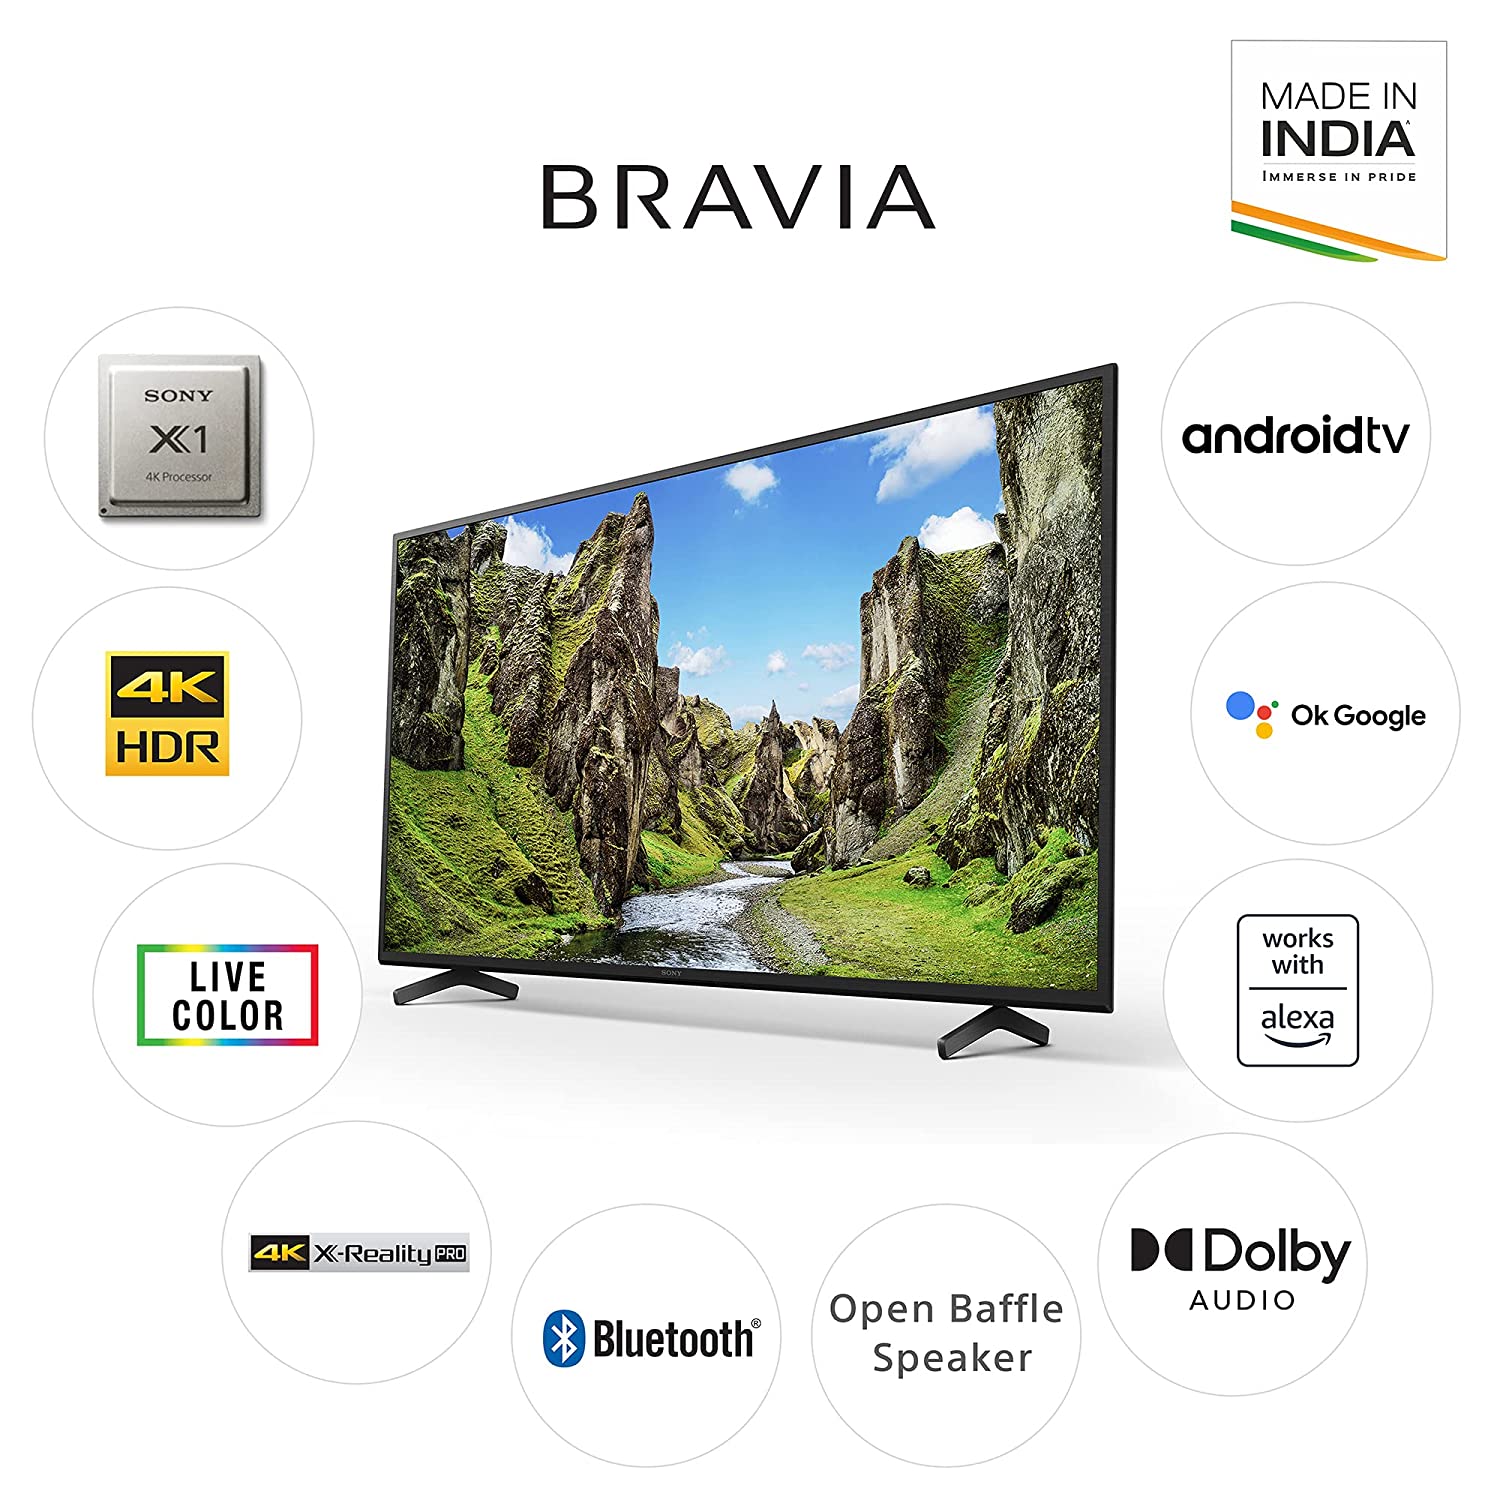 Sony Bravia 126 cm (50 inches) 4K Ultra HD Smart Android LED TV KD-50X75